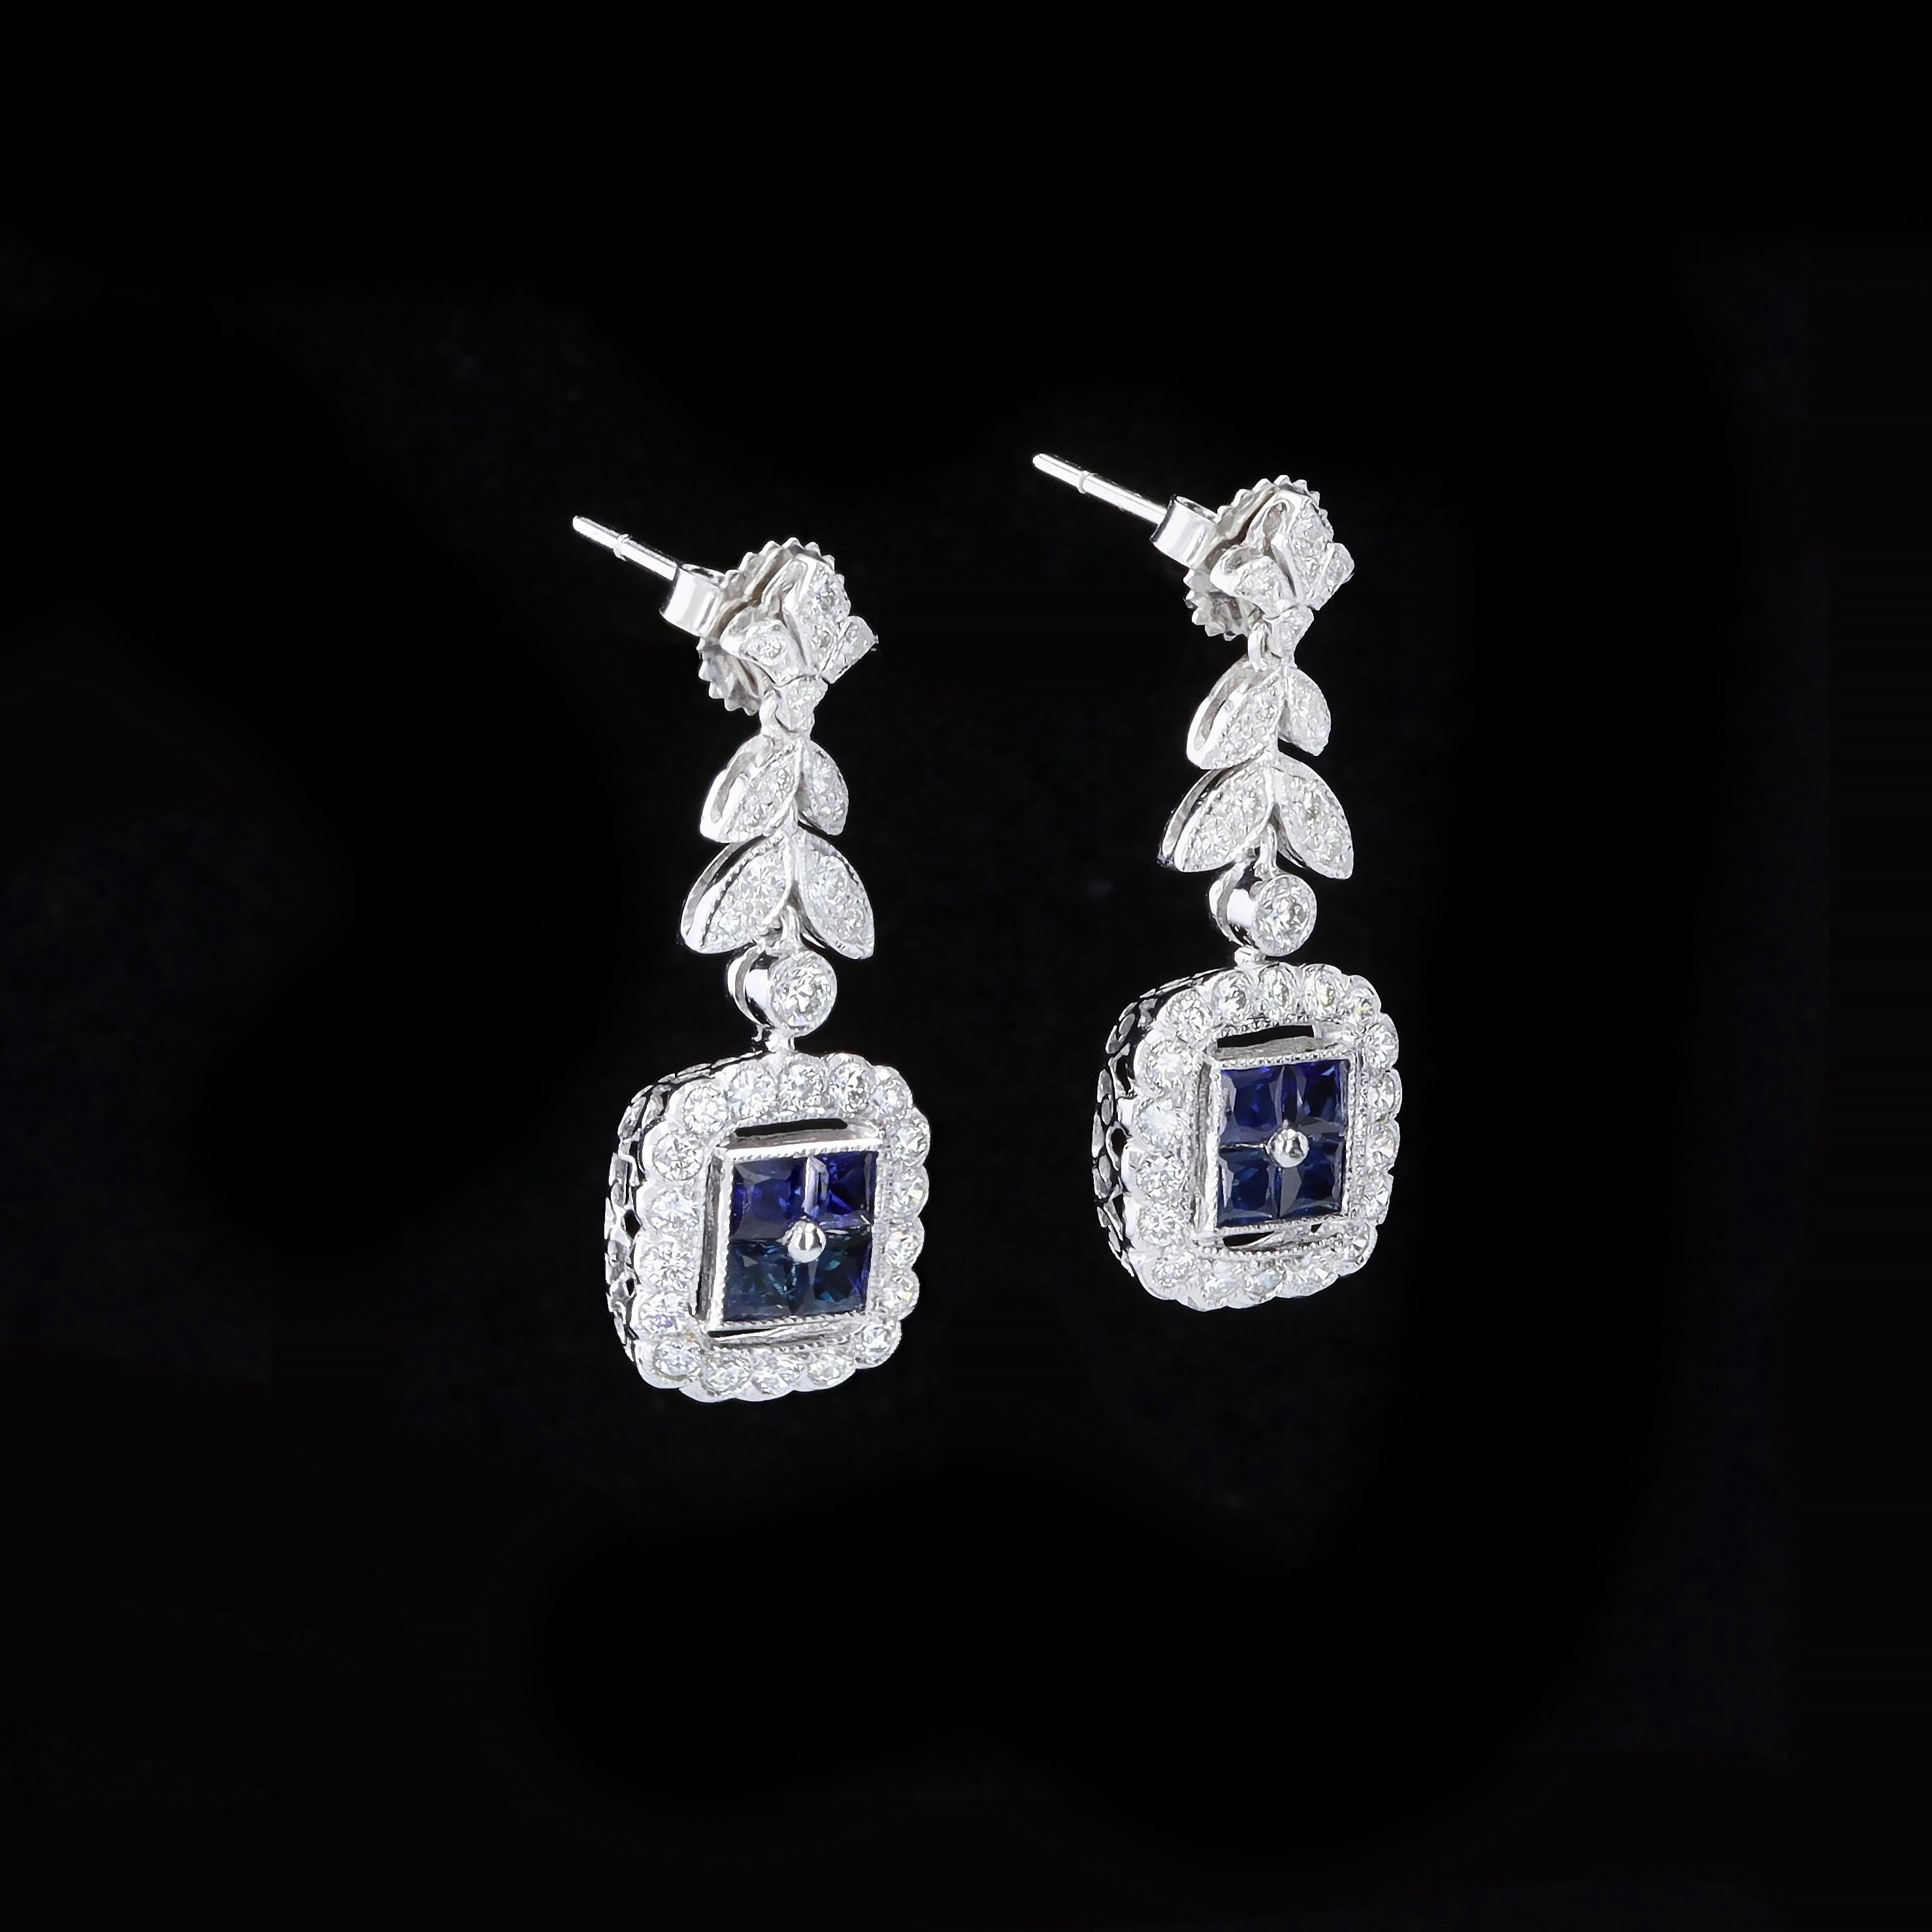 Timeless treasures that provide an eye-catching pop of color. These 18K white gold earrings feature square cut sapphires that weigh approximately 1.00ct. The eight sapphires are accentuated by 62 round cut diamonds that weigh approximately 0.90ct.